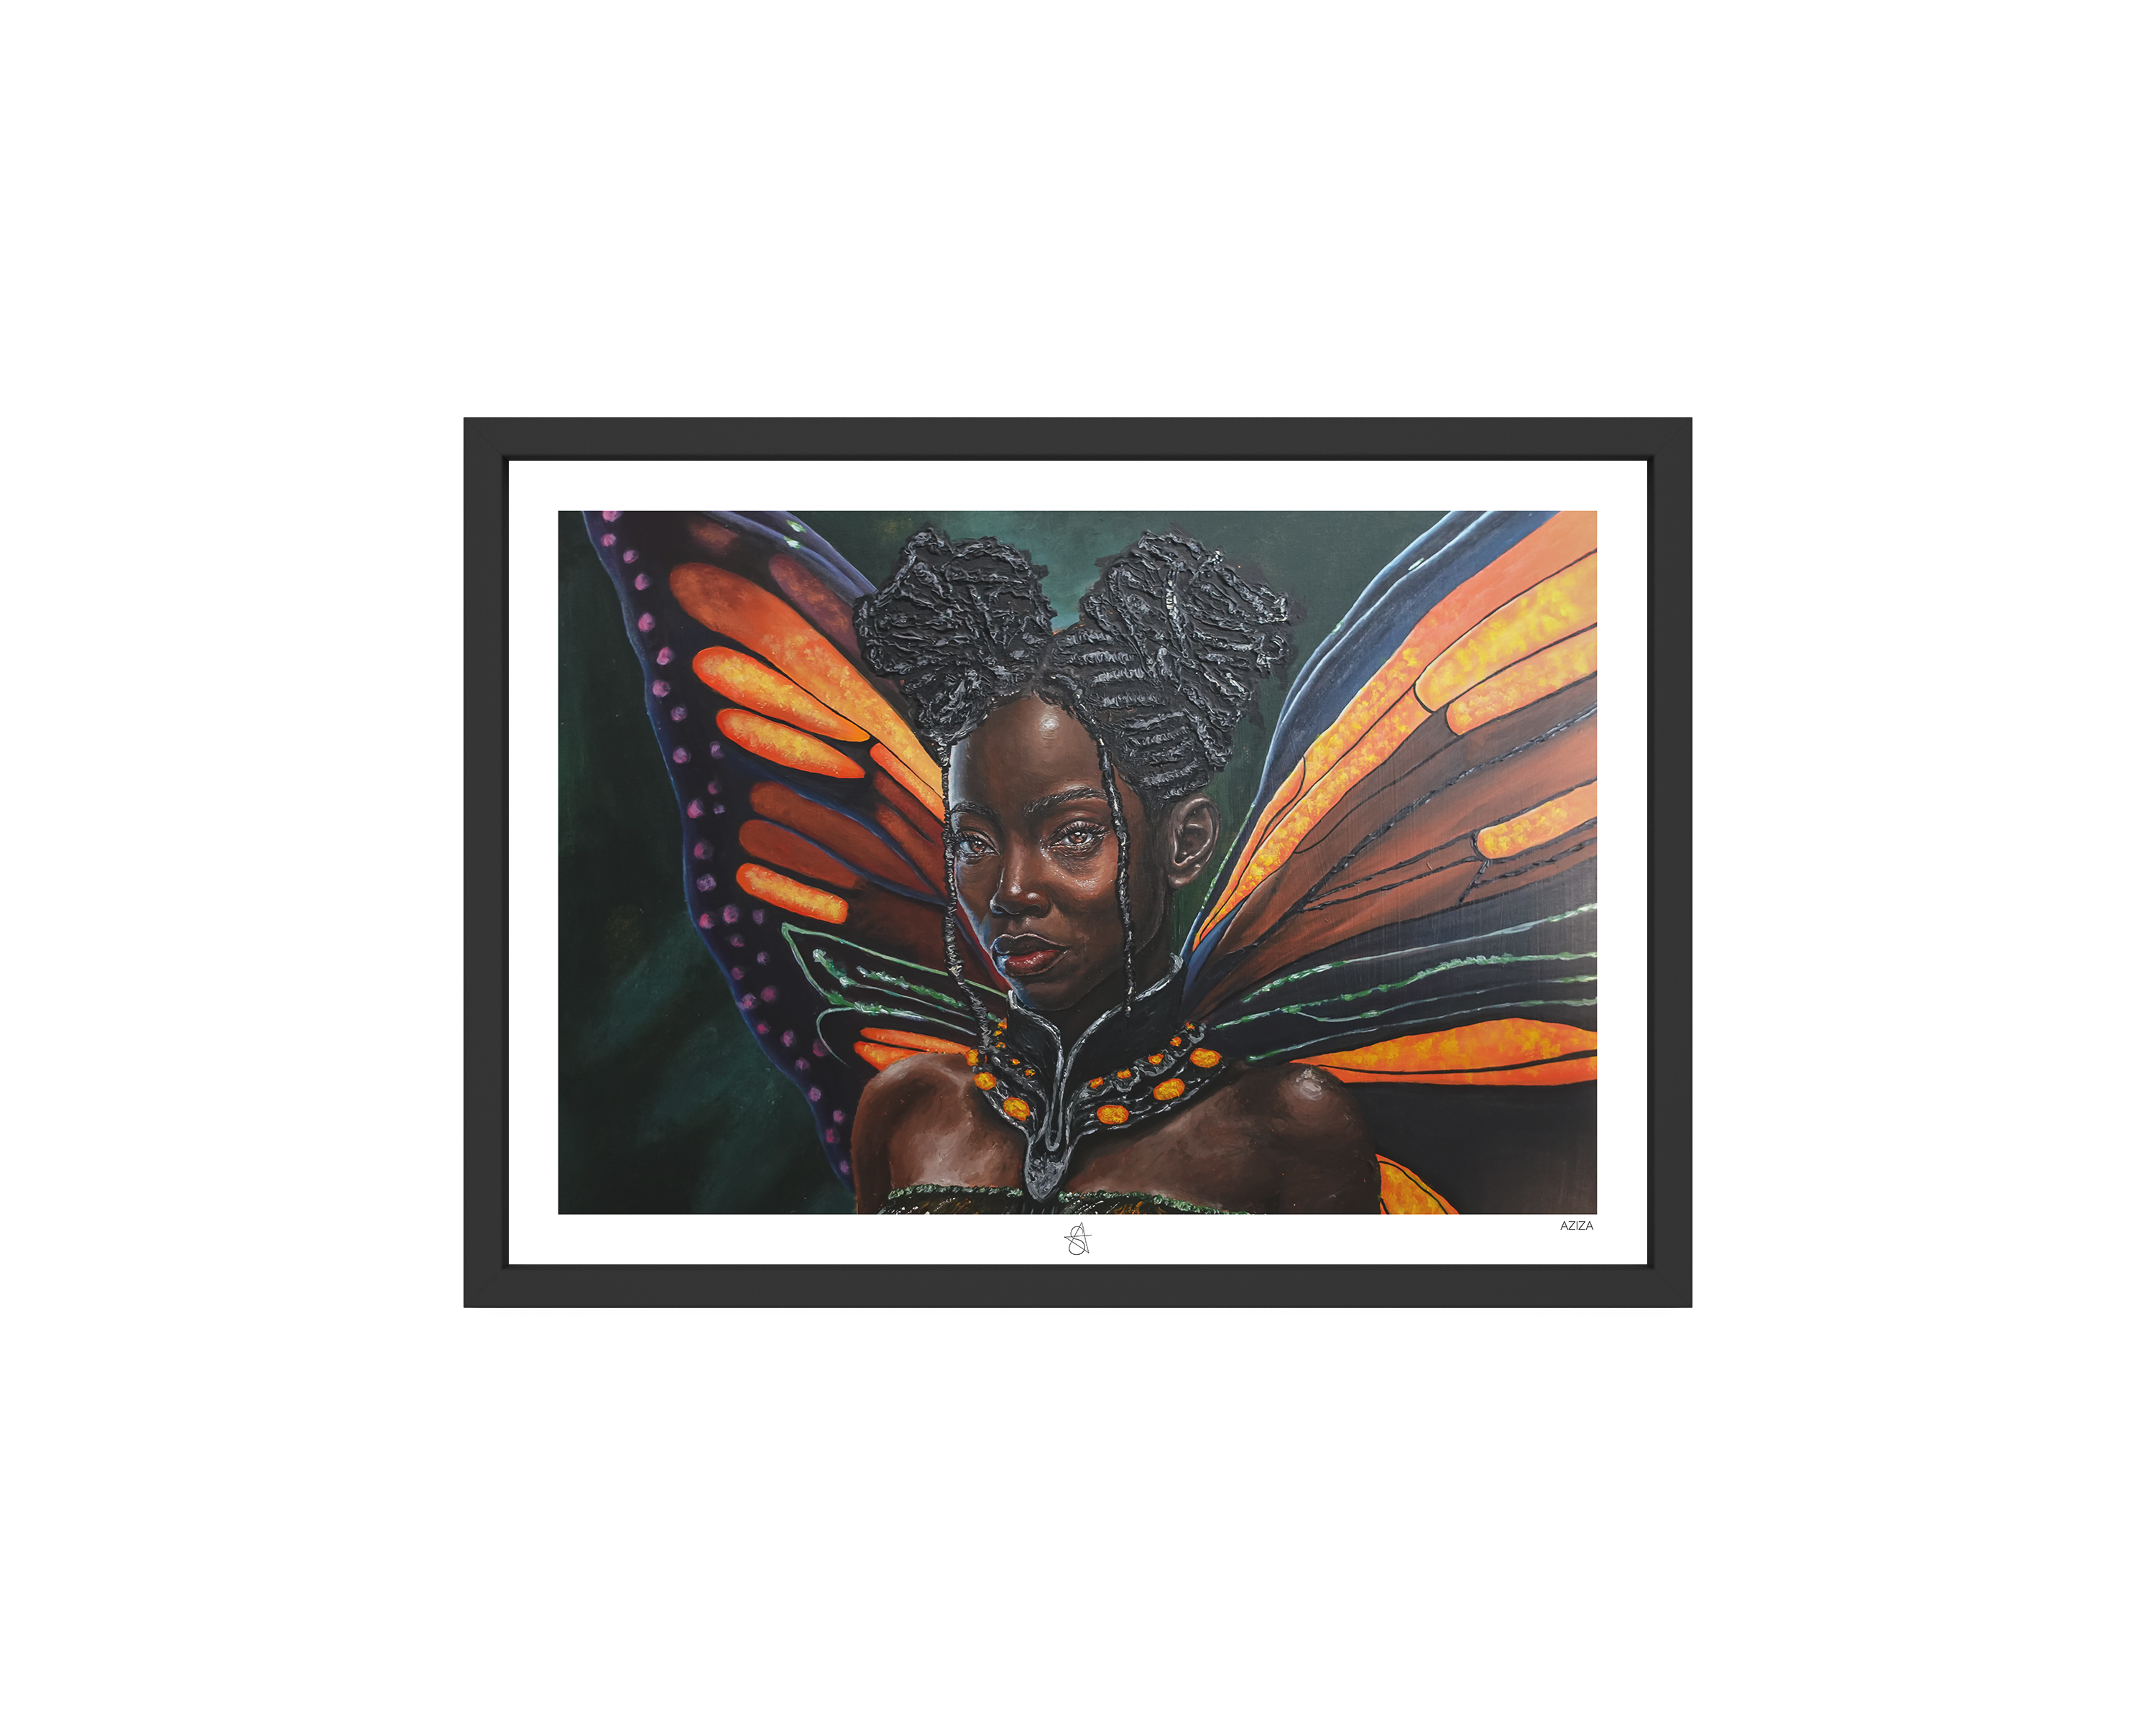 Aziza Art Print on high-quality matte or velvet paper, framed in gallery black, white, or natural maple, depicting Dahomey African Black Fairies who have butterfly wings.